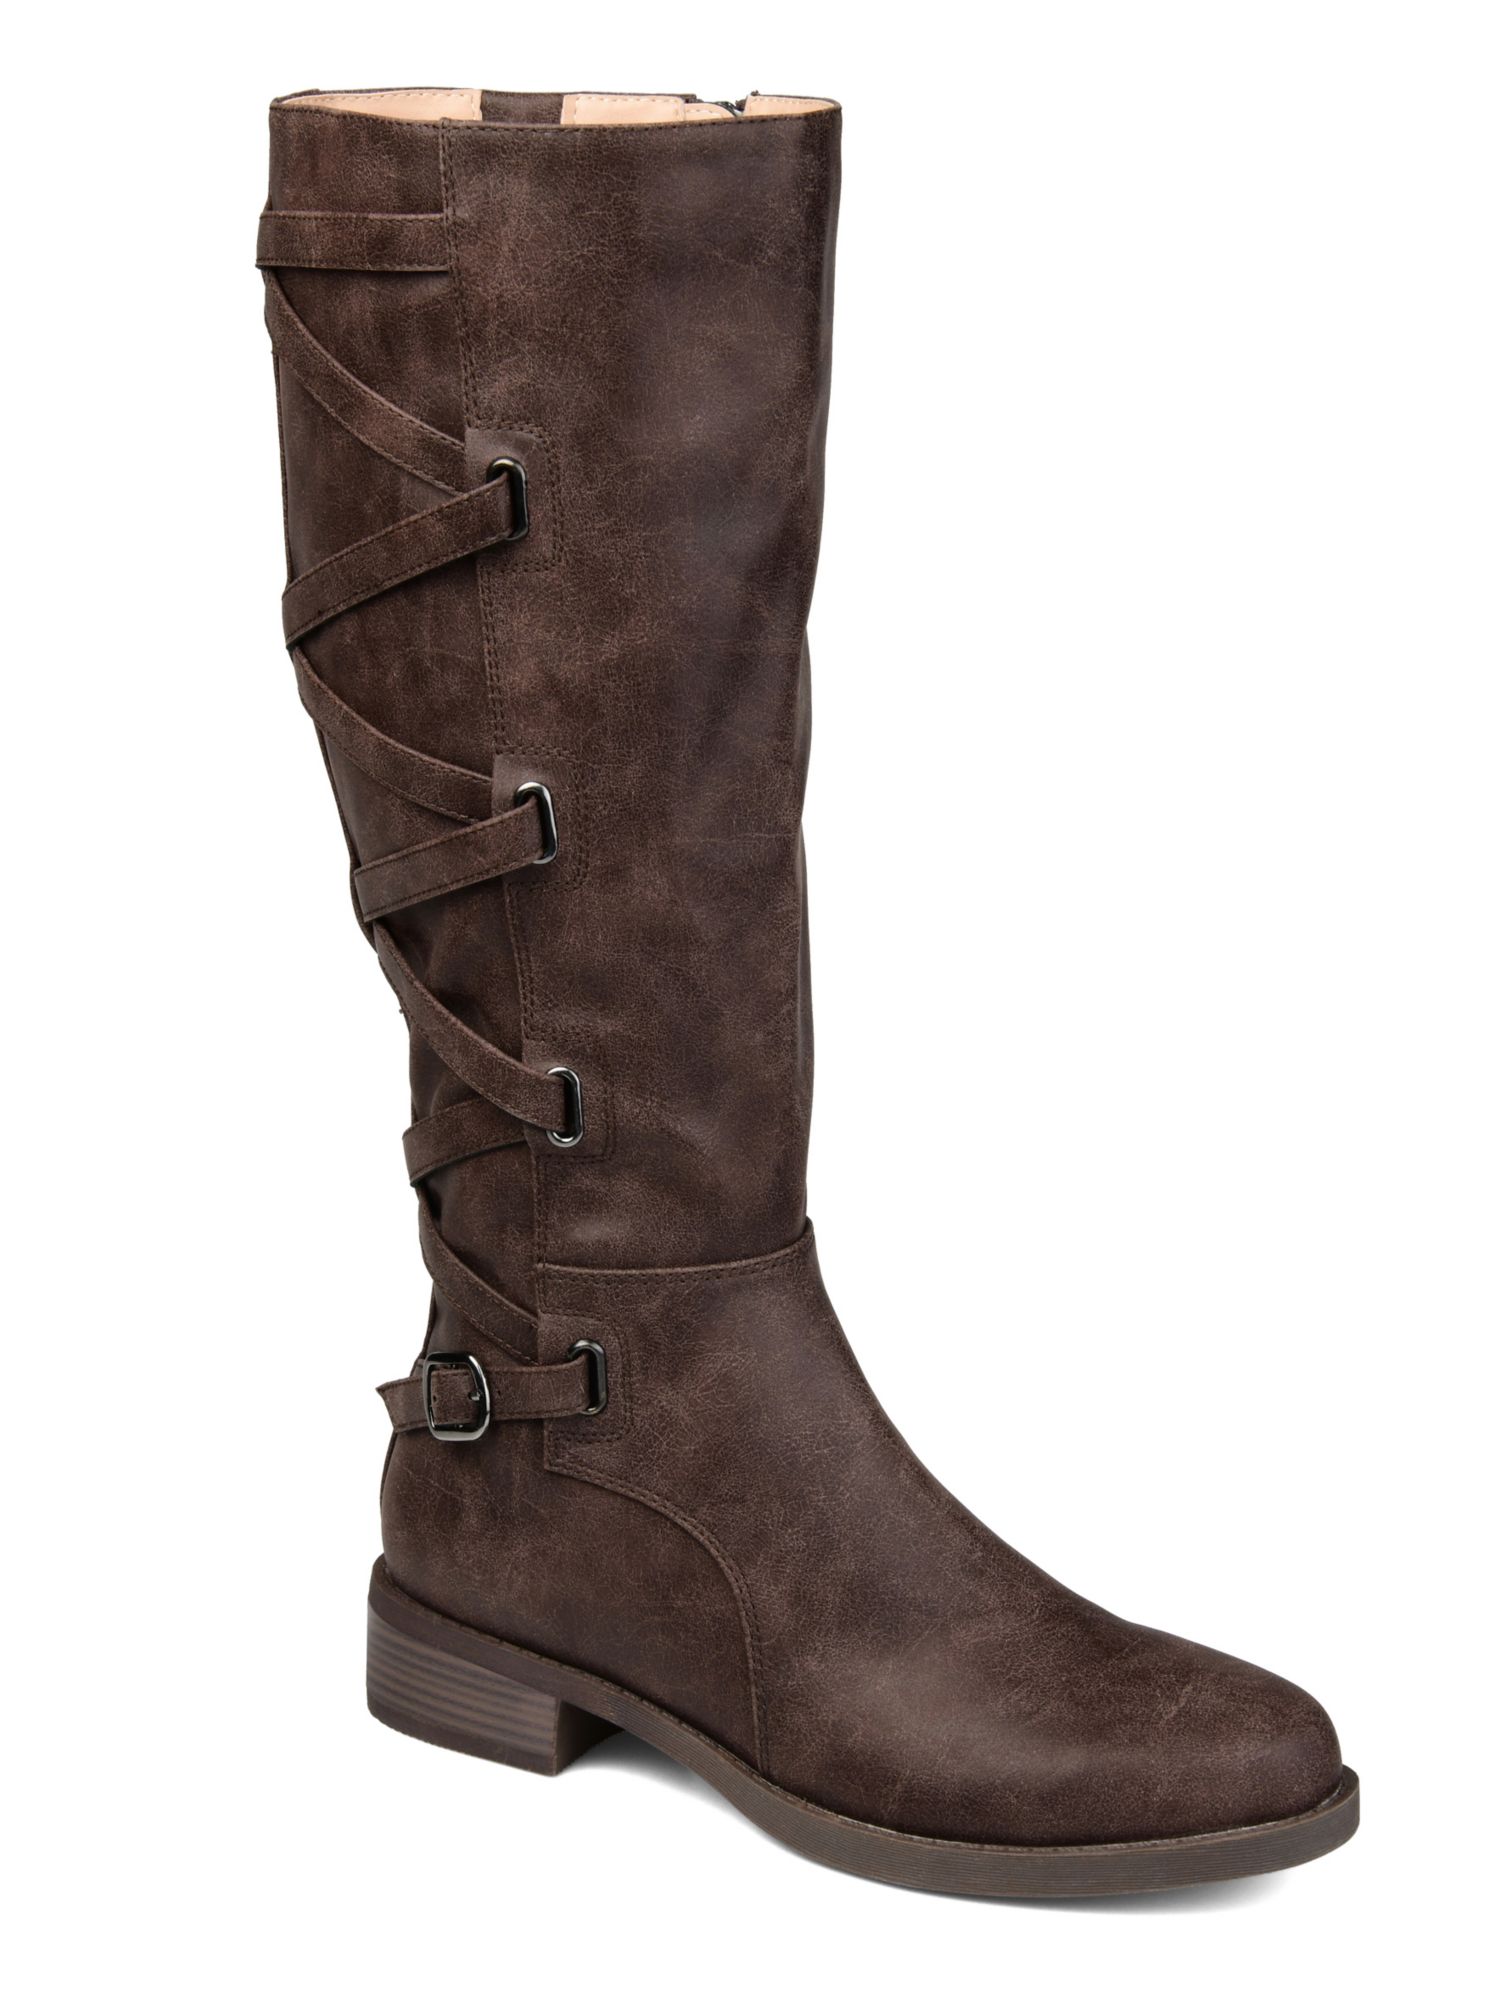 JOURNEE COLLECTION Womens Brown Extra Wide Calf Almond Toe Stacked Heel Zip-Up Boots 6.5